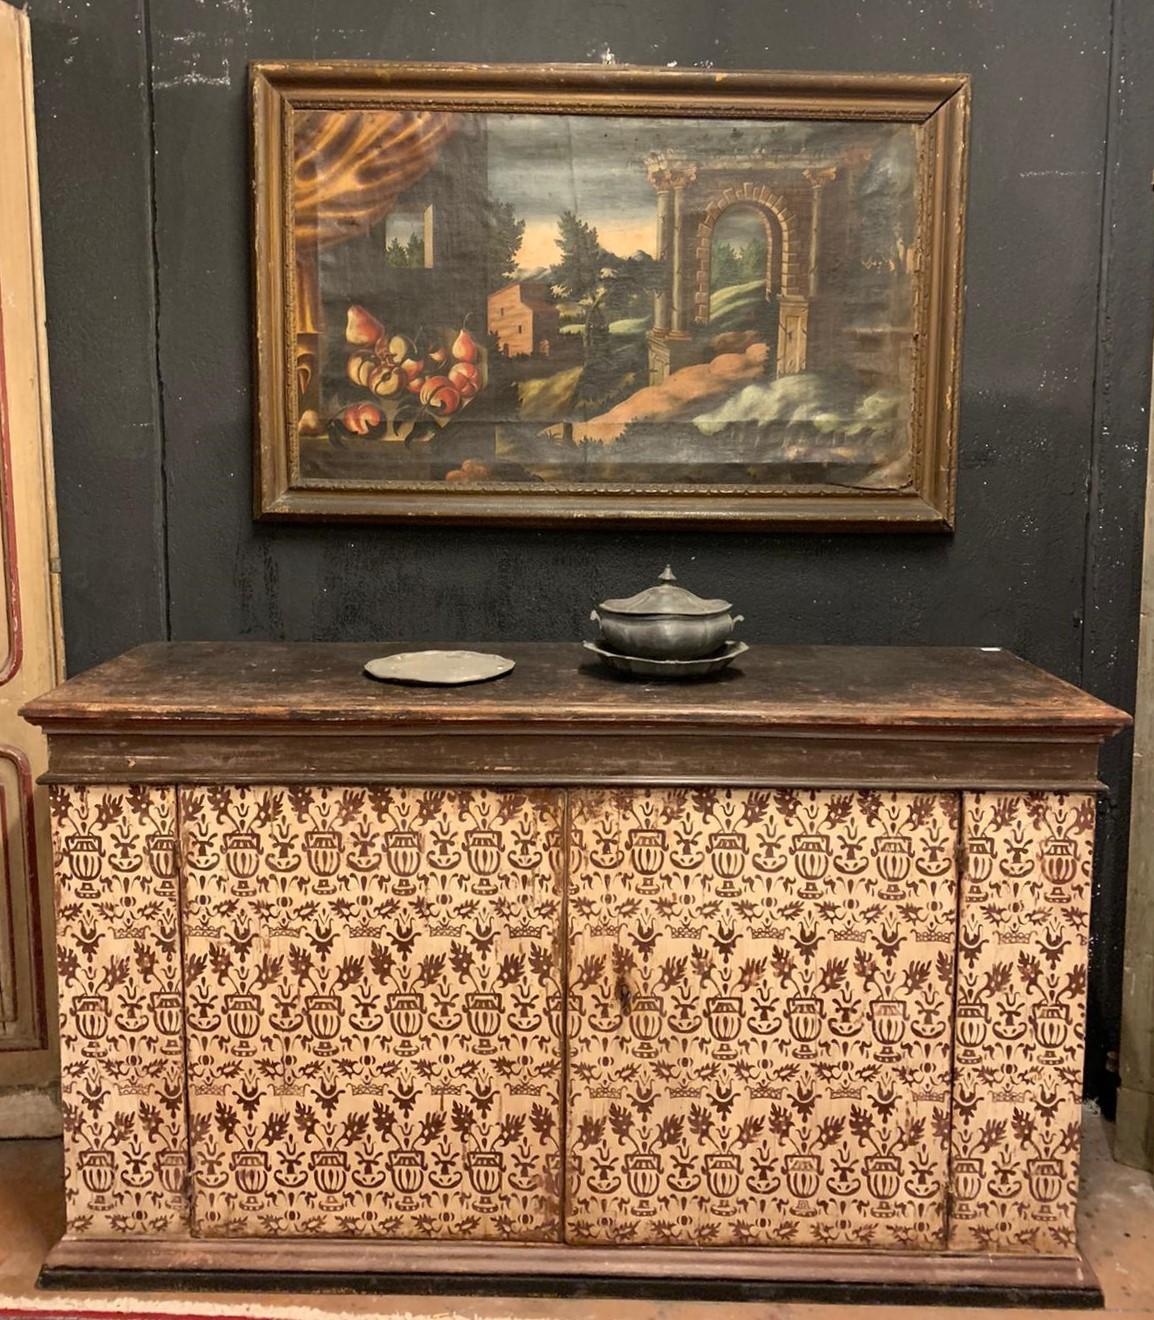 Antique sideboard in lacquered and painted wood with typical texture of the time, built in the 17th century for a palace in Florence (Italy), earth colors and warm tones make this type very elegant and suitable for any interior, it has only a shelf